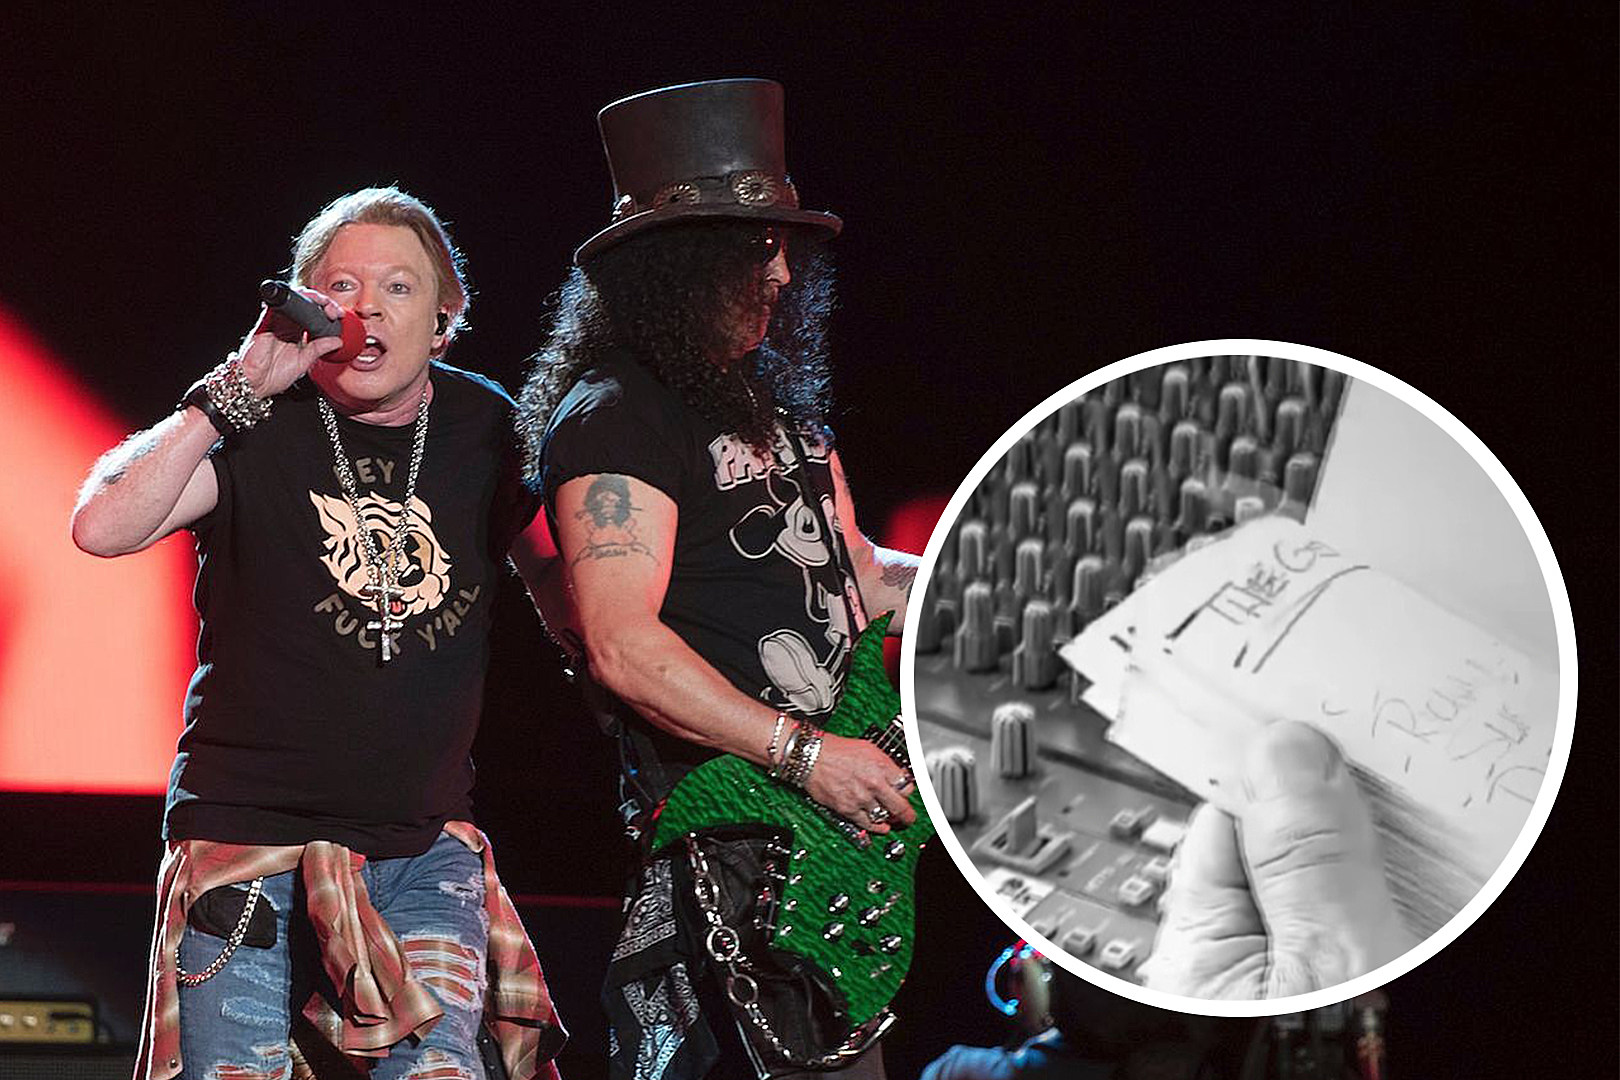 How Guns N' Roses Fans Leaked 19 CDs of 'Chinese Democracy' Outtakes